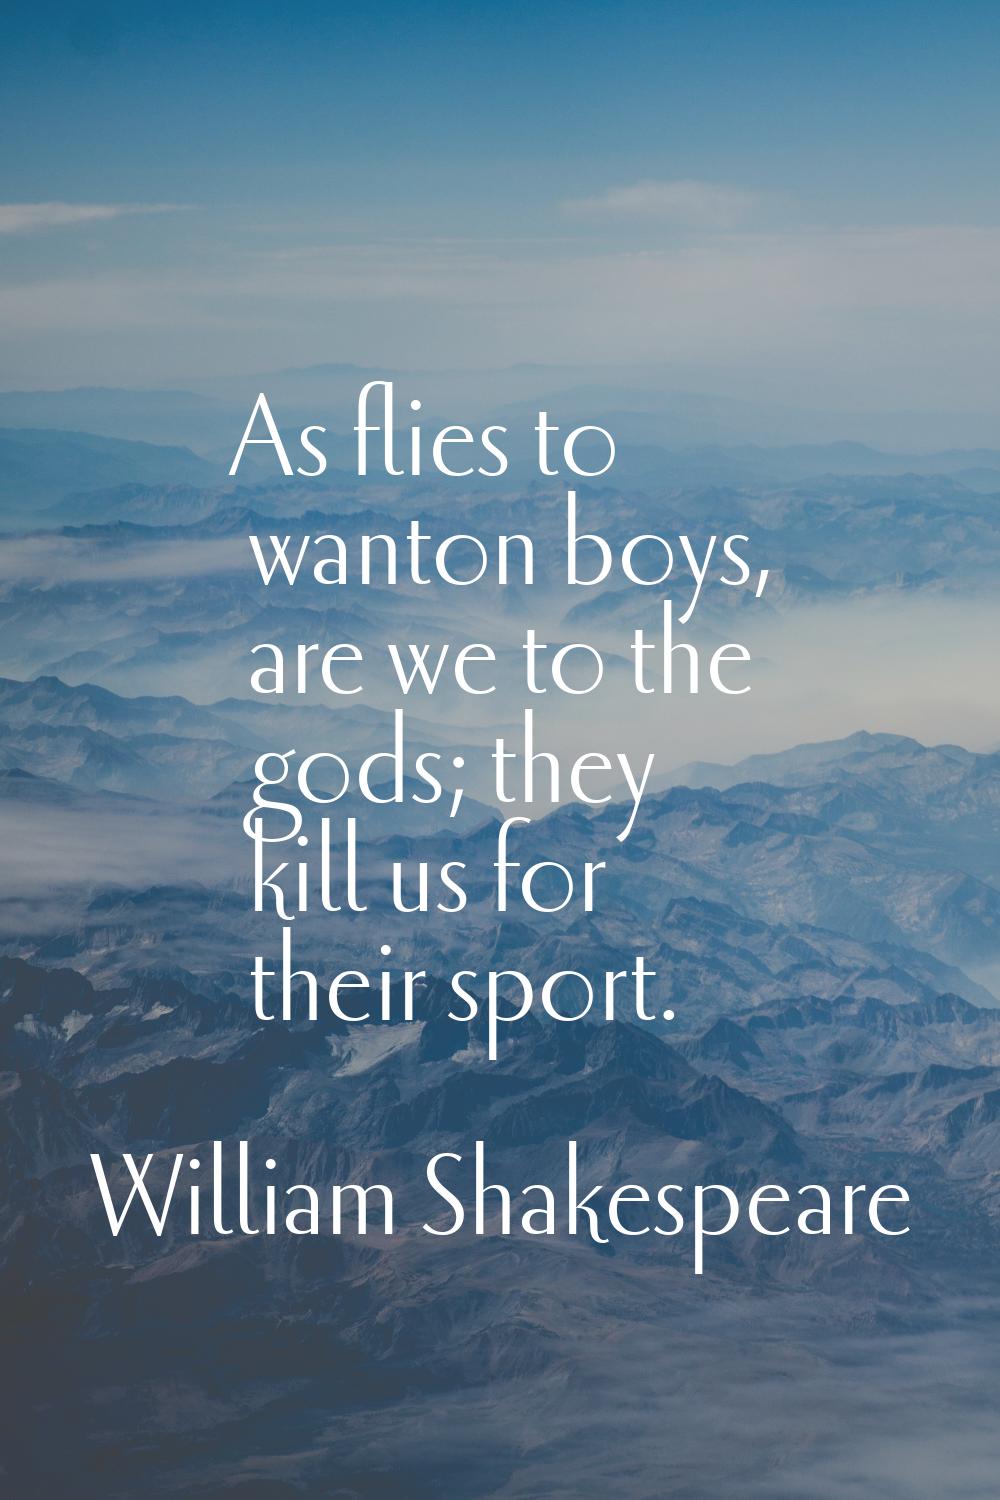 As flies to wanton boys, are we to the gods; they kill us for their sport.